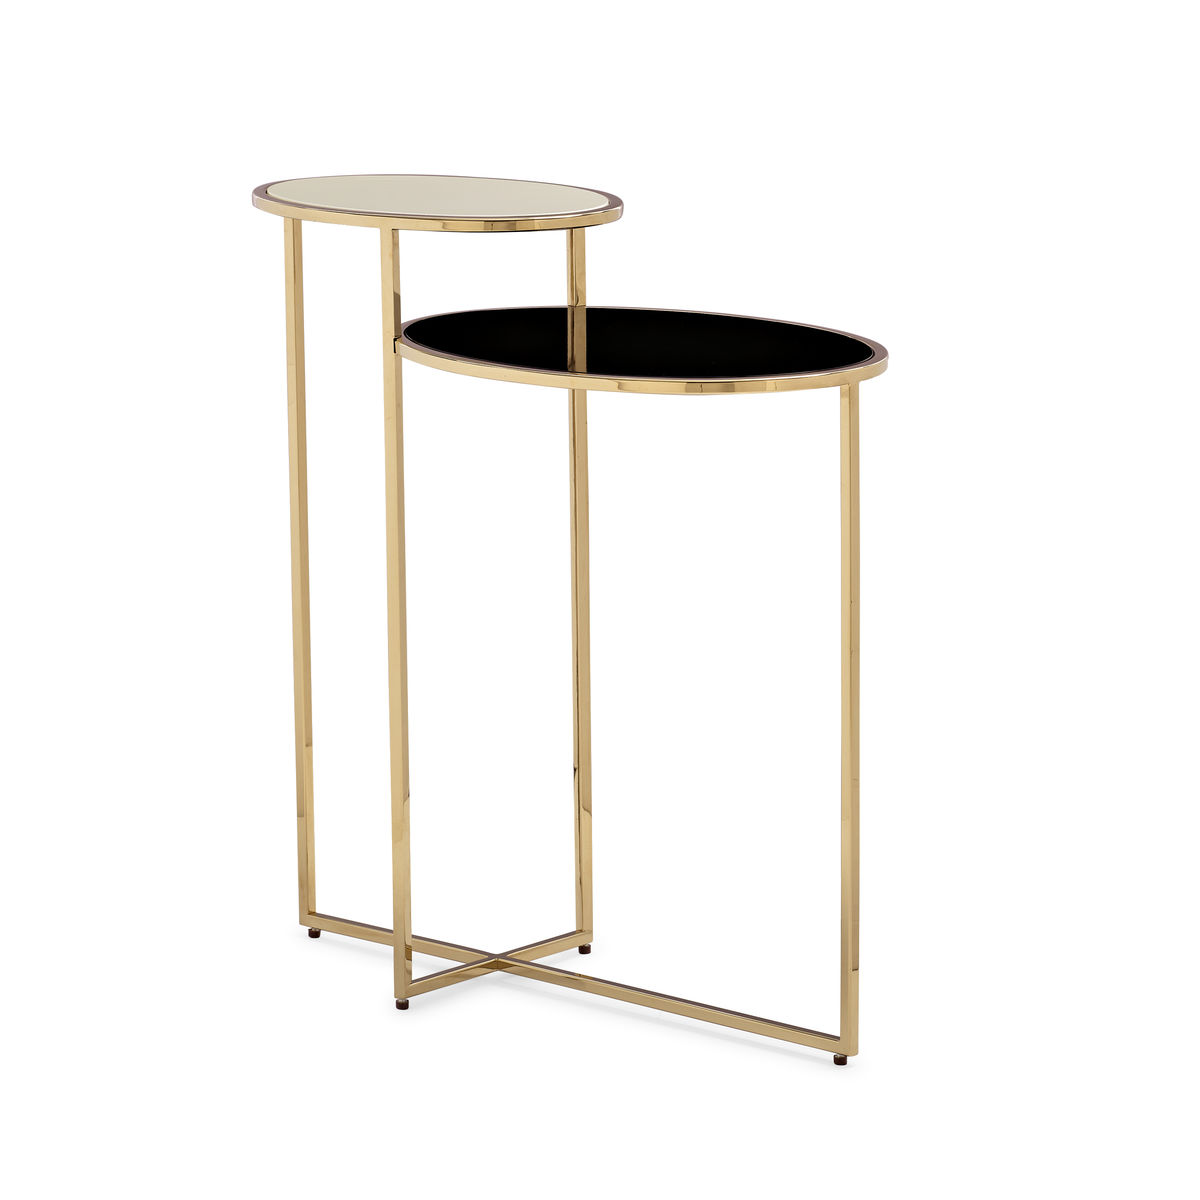 The Liaison Side Table